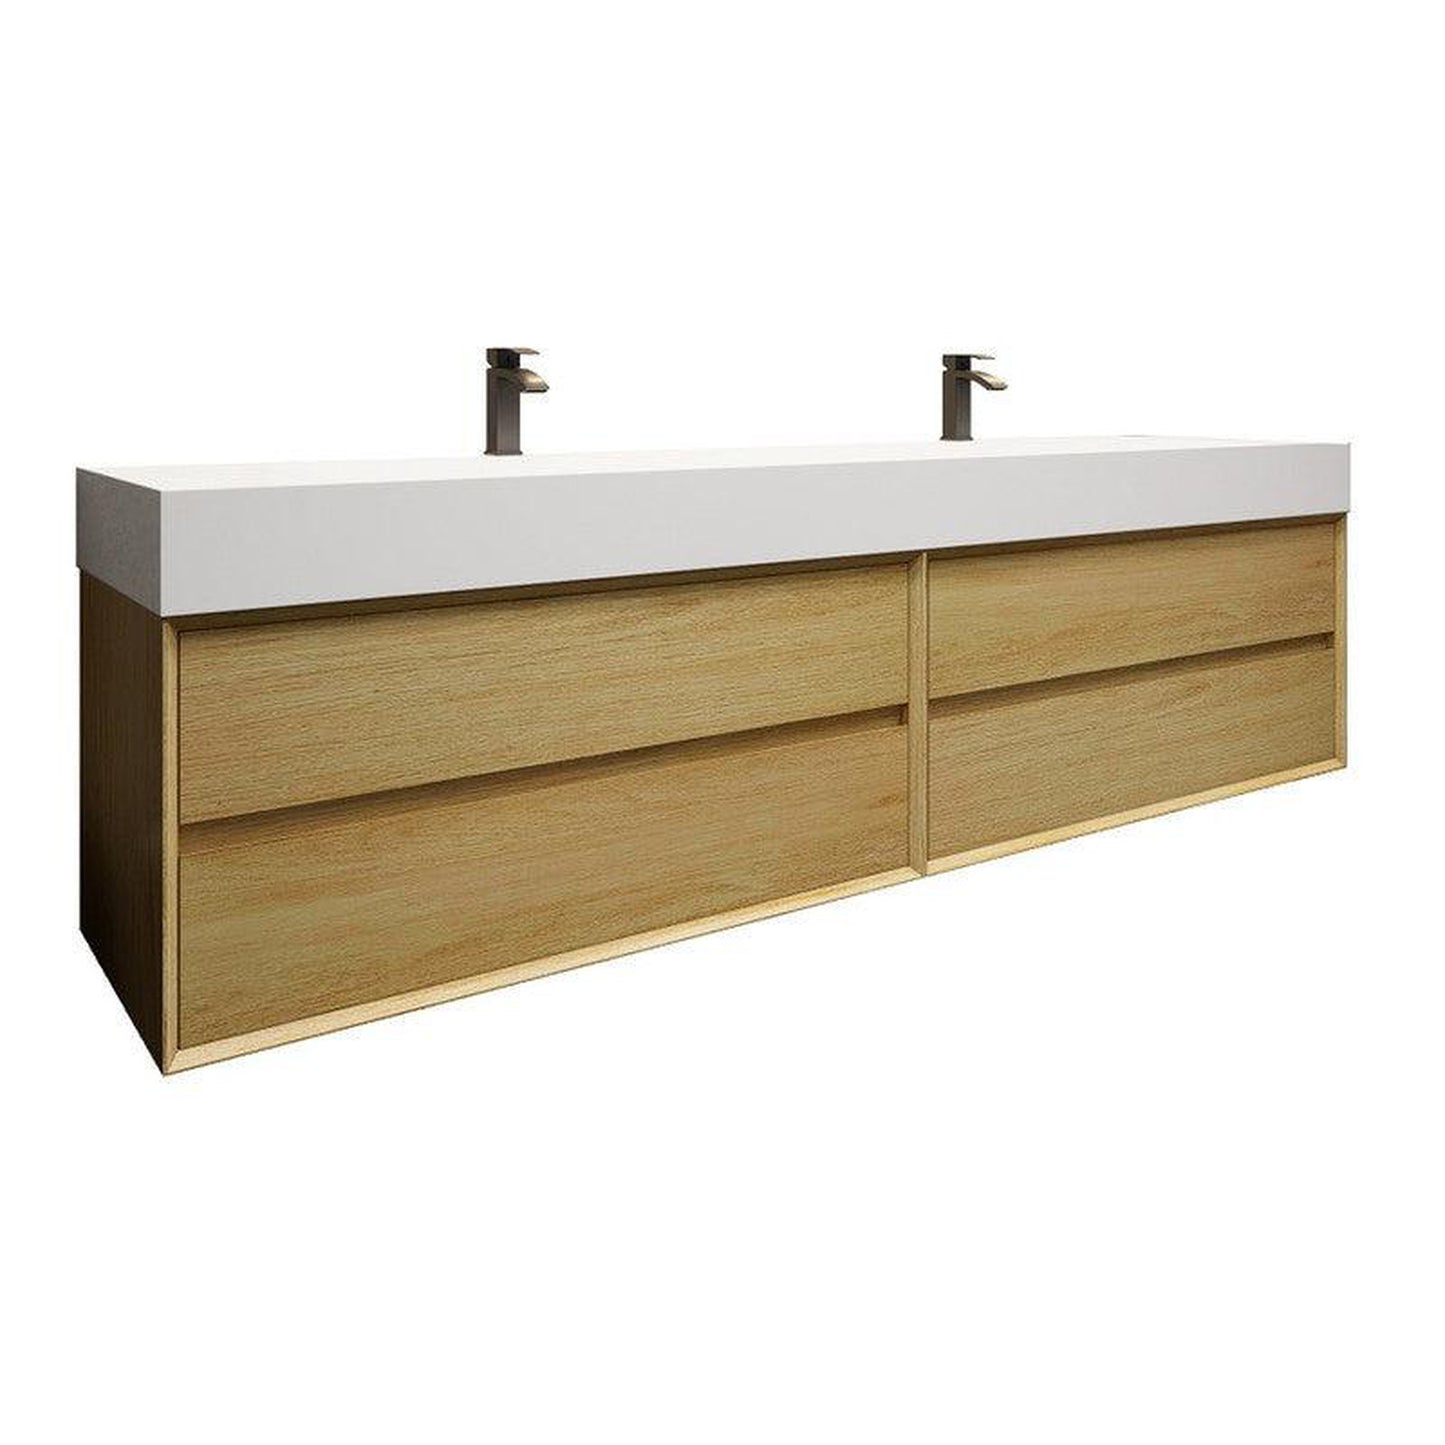 Moreno Bath MAX 84" Teak Oak Wall-Mounted Vanity With Double Faucet Holes and Reinforced White Acrylic Sink